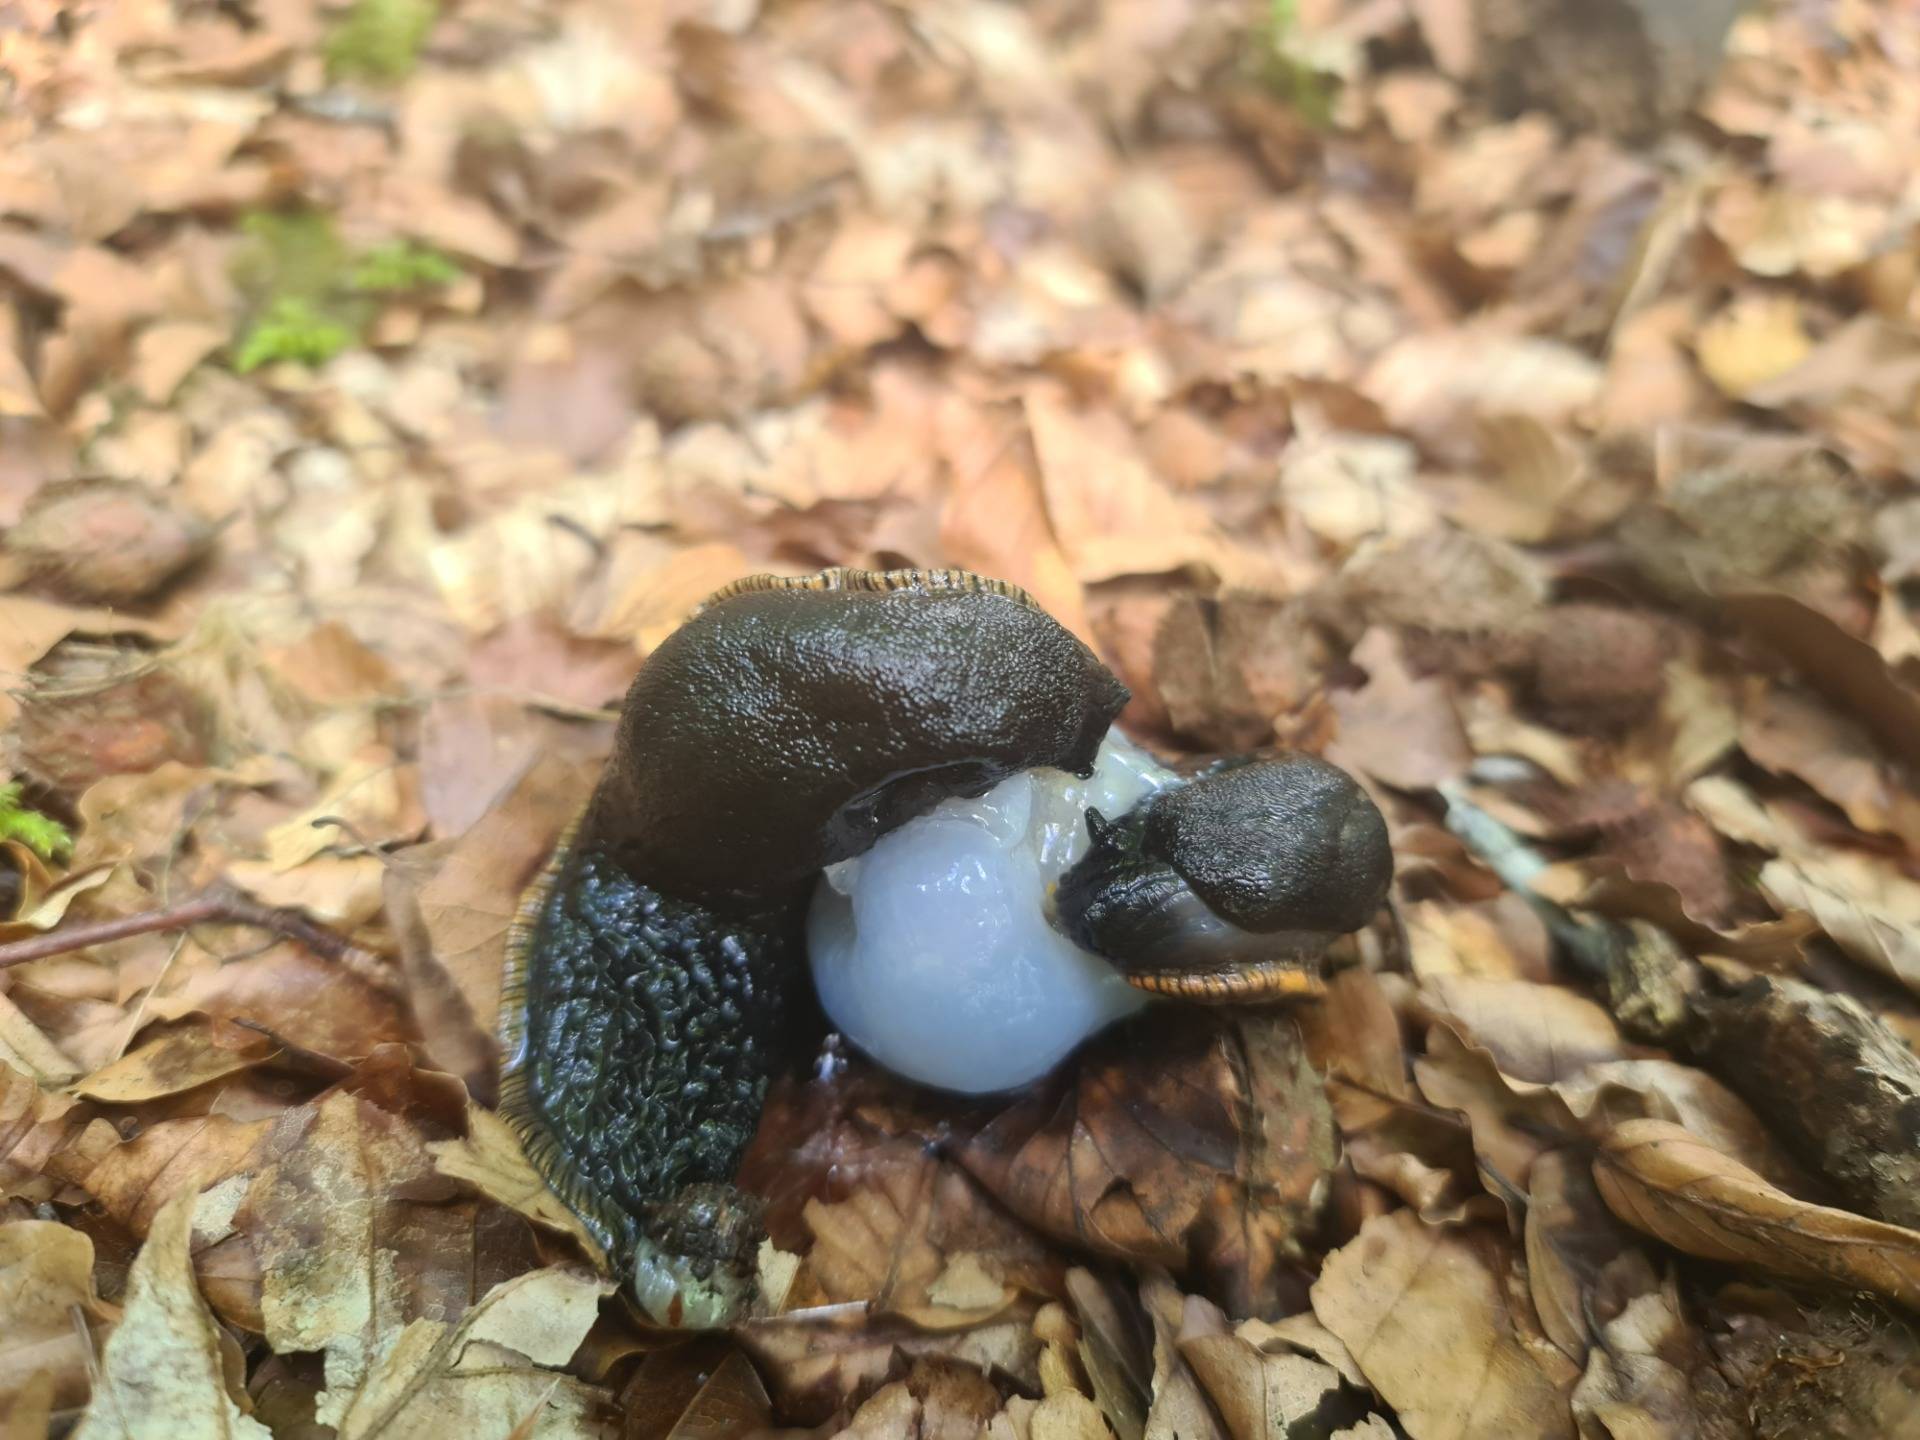 Common slugs (Arion ater) on top of that ball of compact mucus.